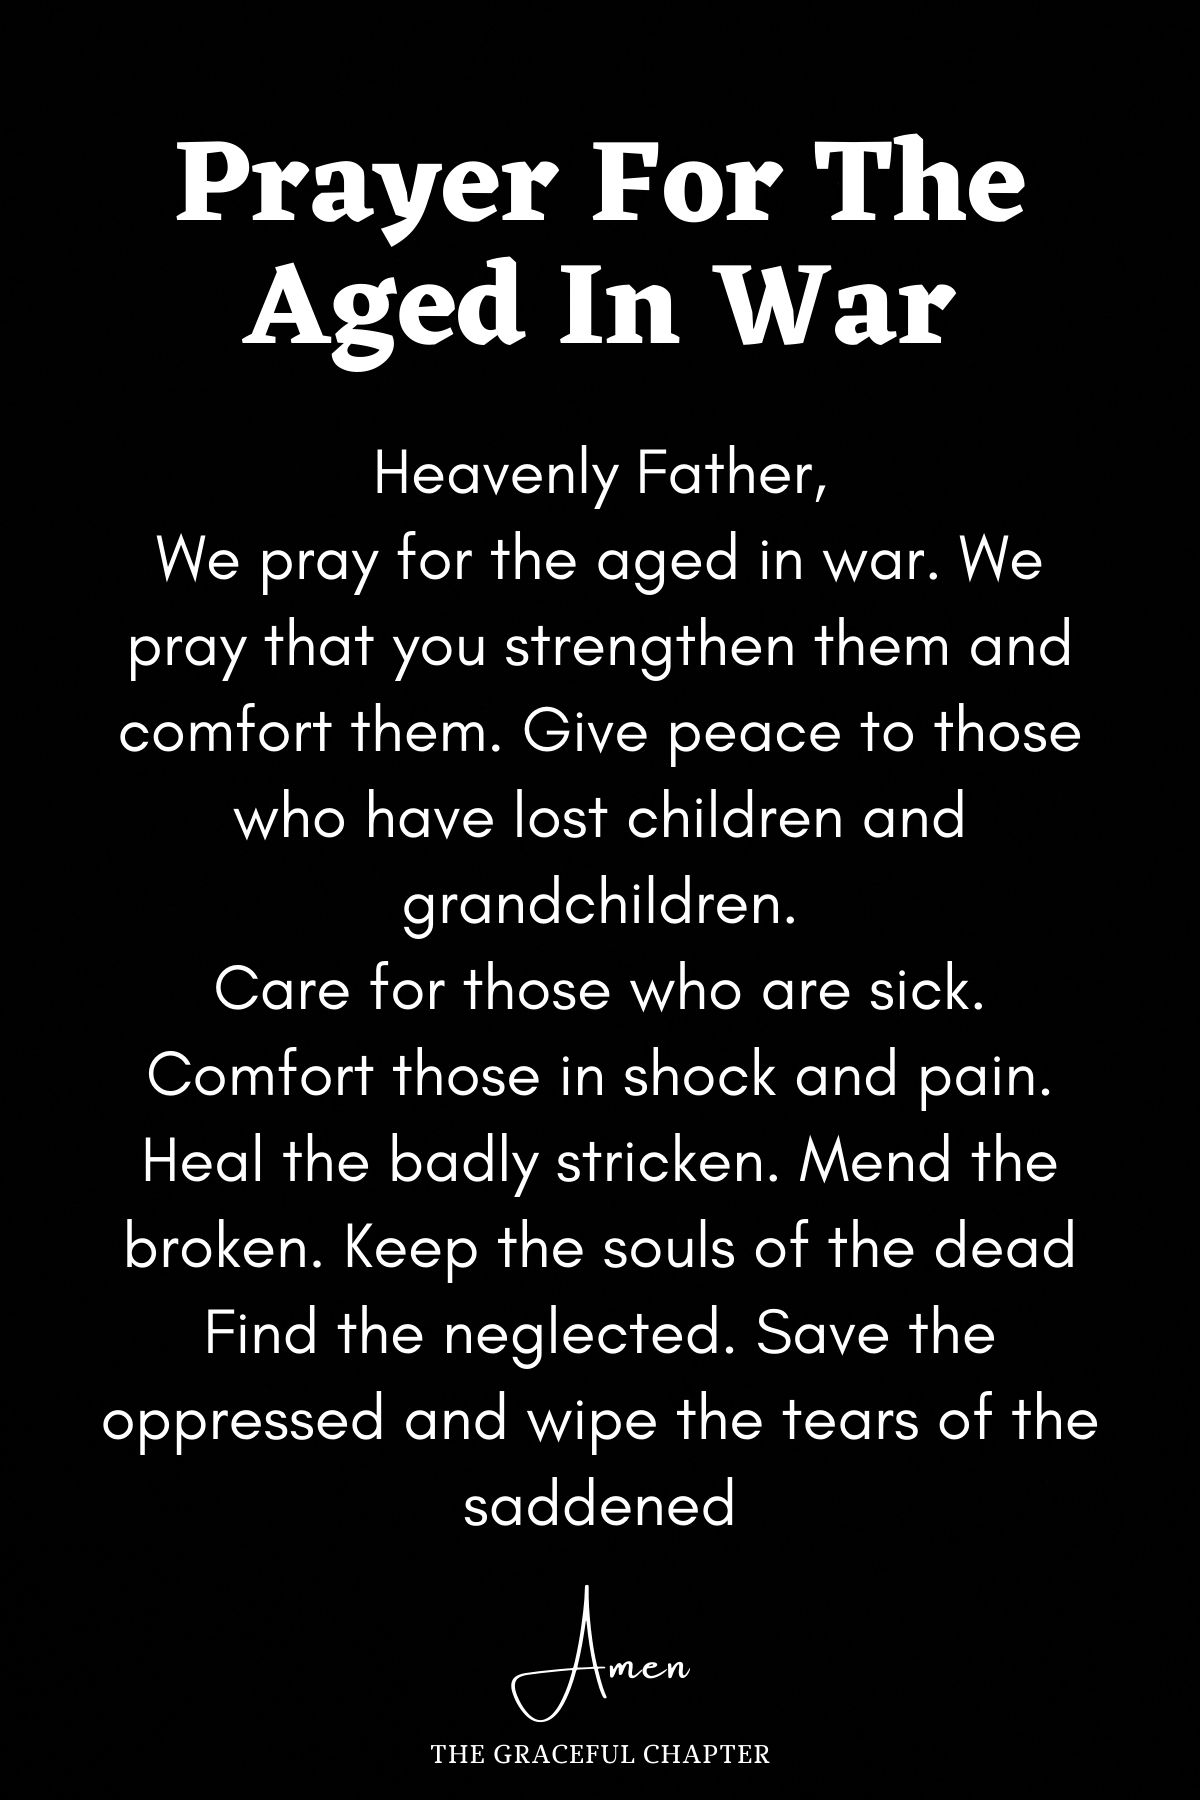 Prayer for the aged in war